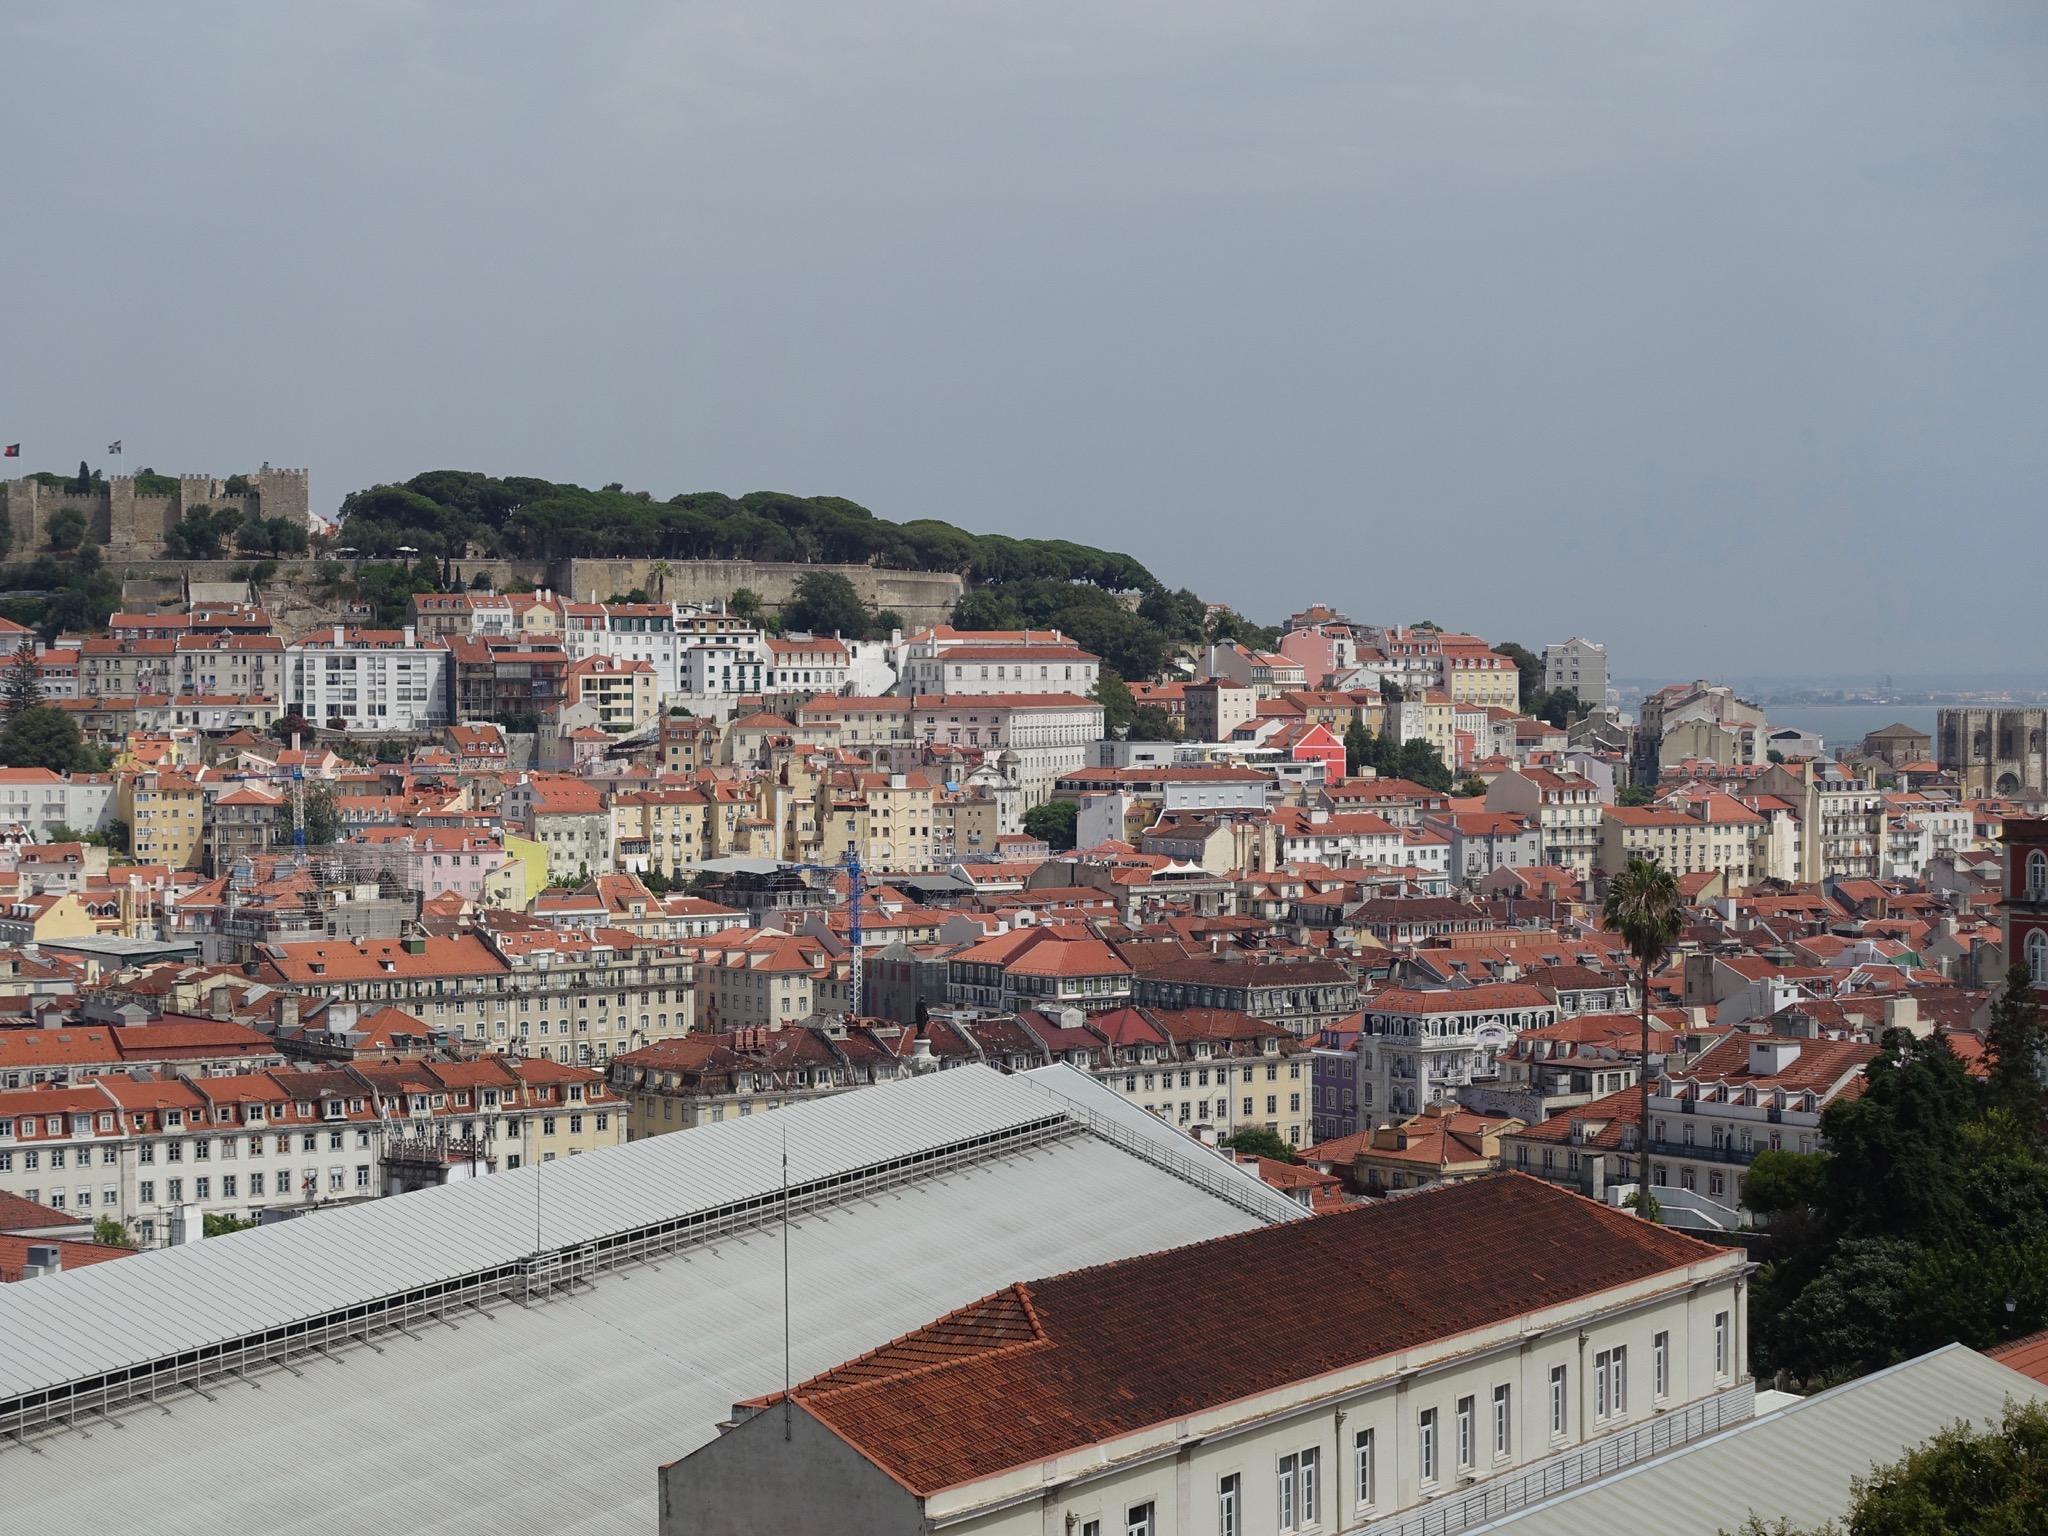 Photo 72 of 86 from the album Highlights Lisbon 2015.